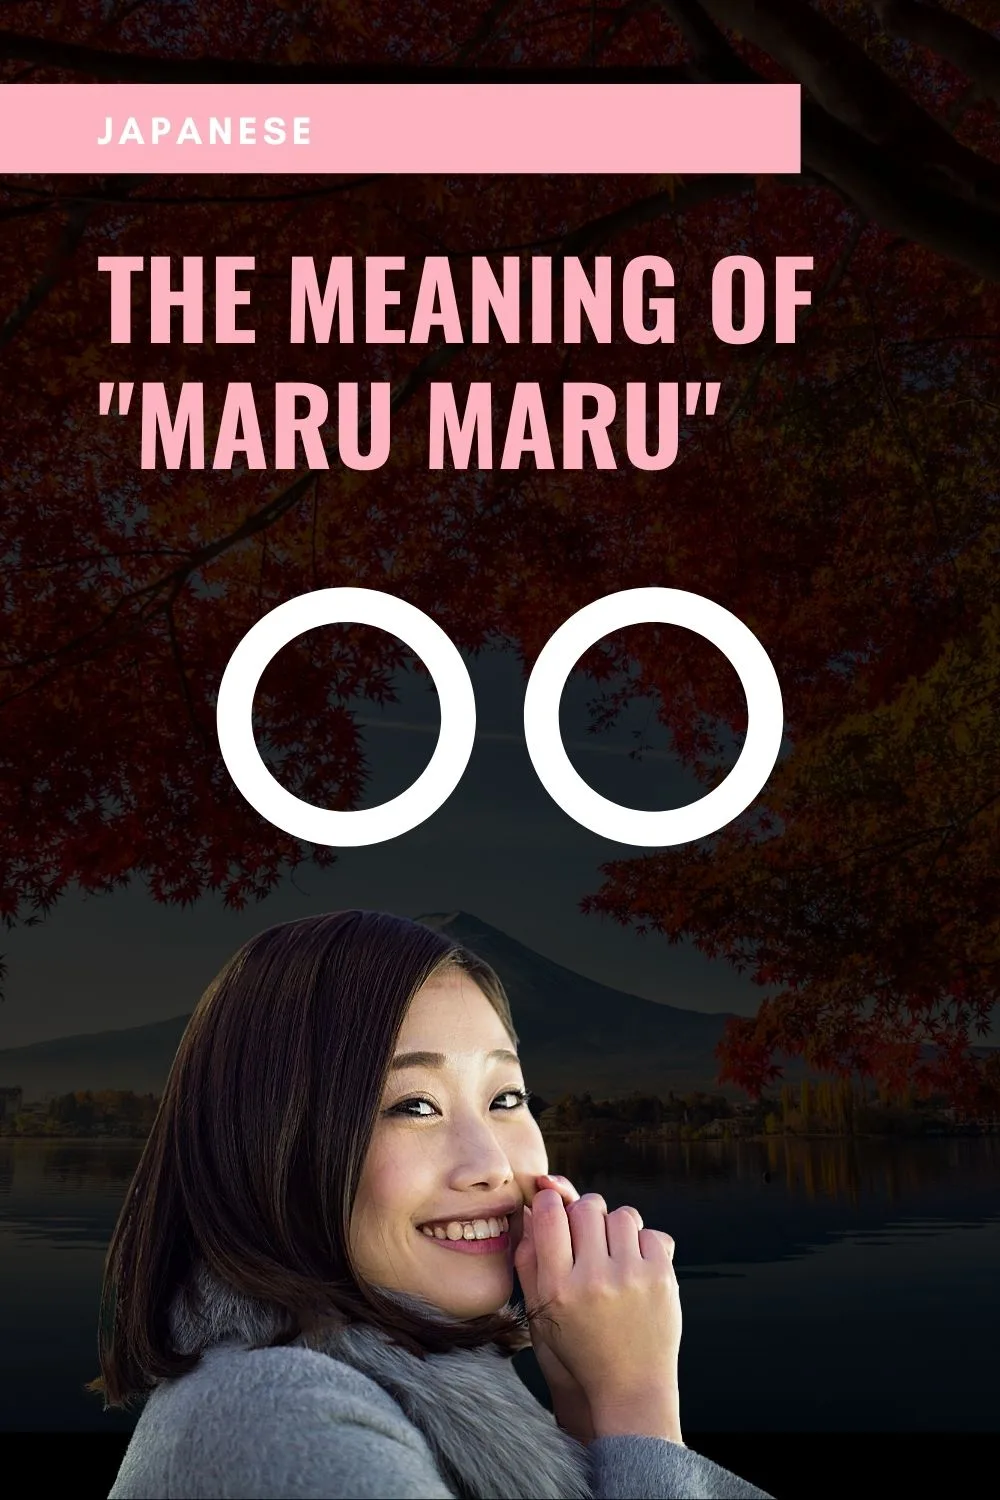 The Meaning of Maru Maru